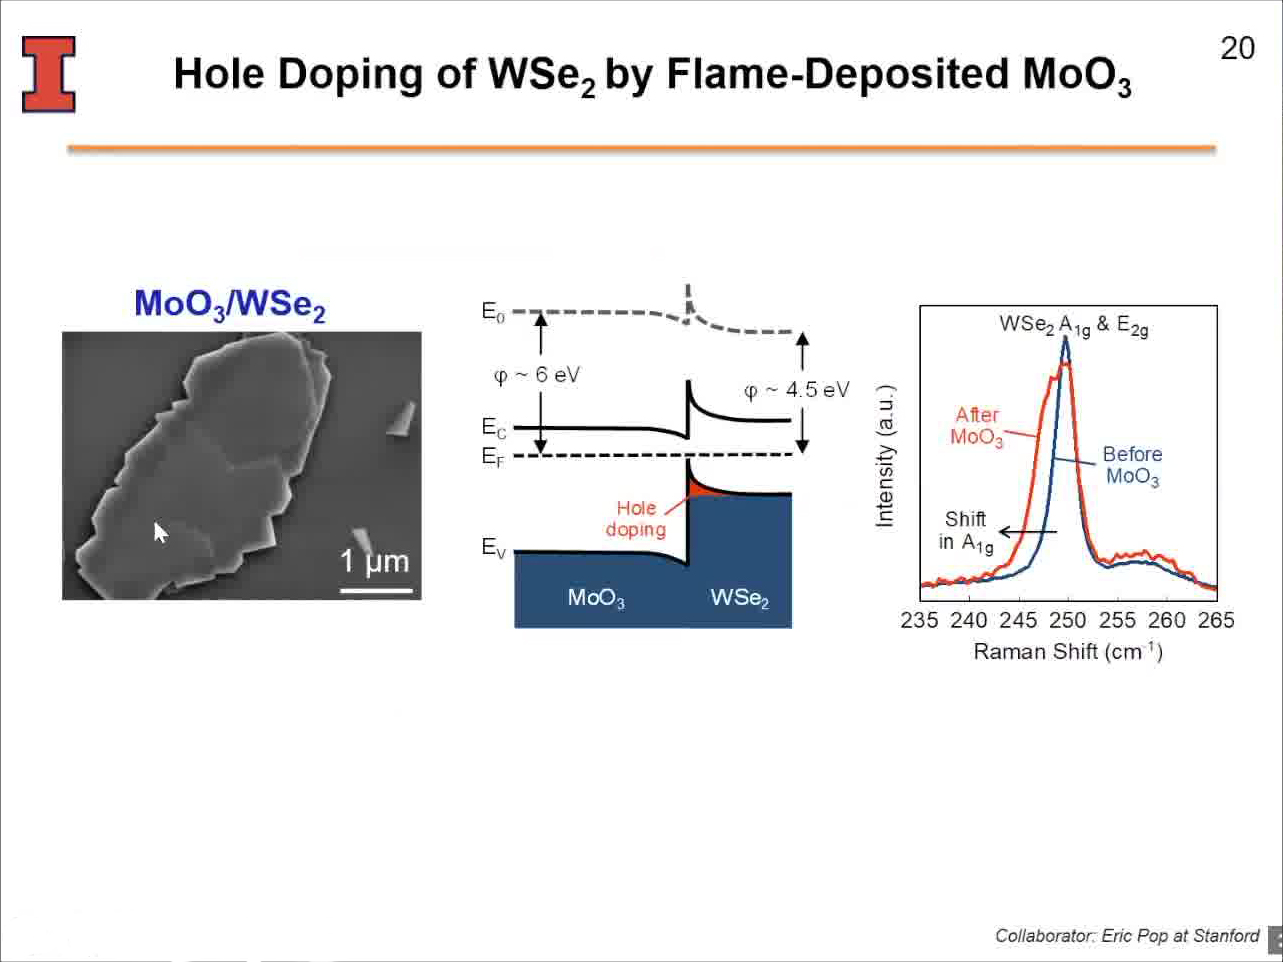 Hole Doping of WSe2 by Flame-Deposited MoO3